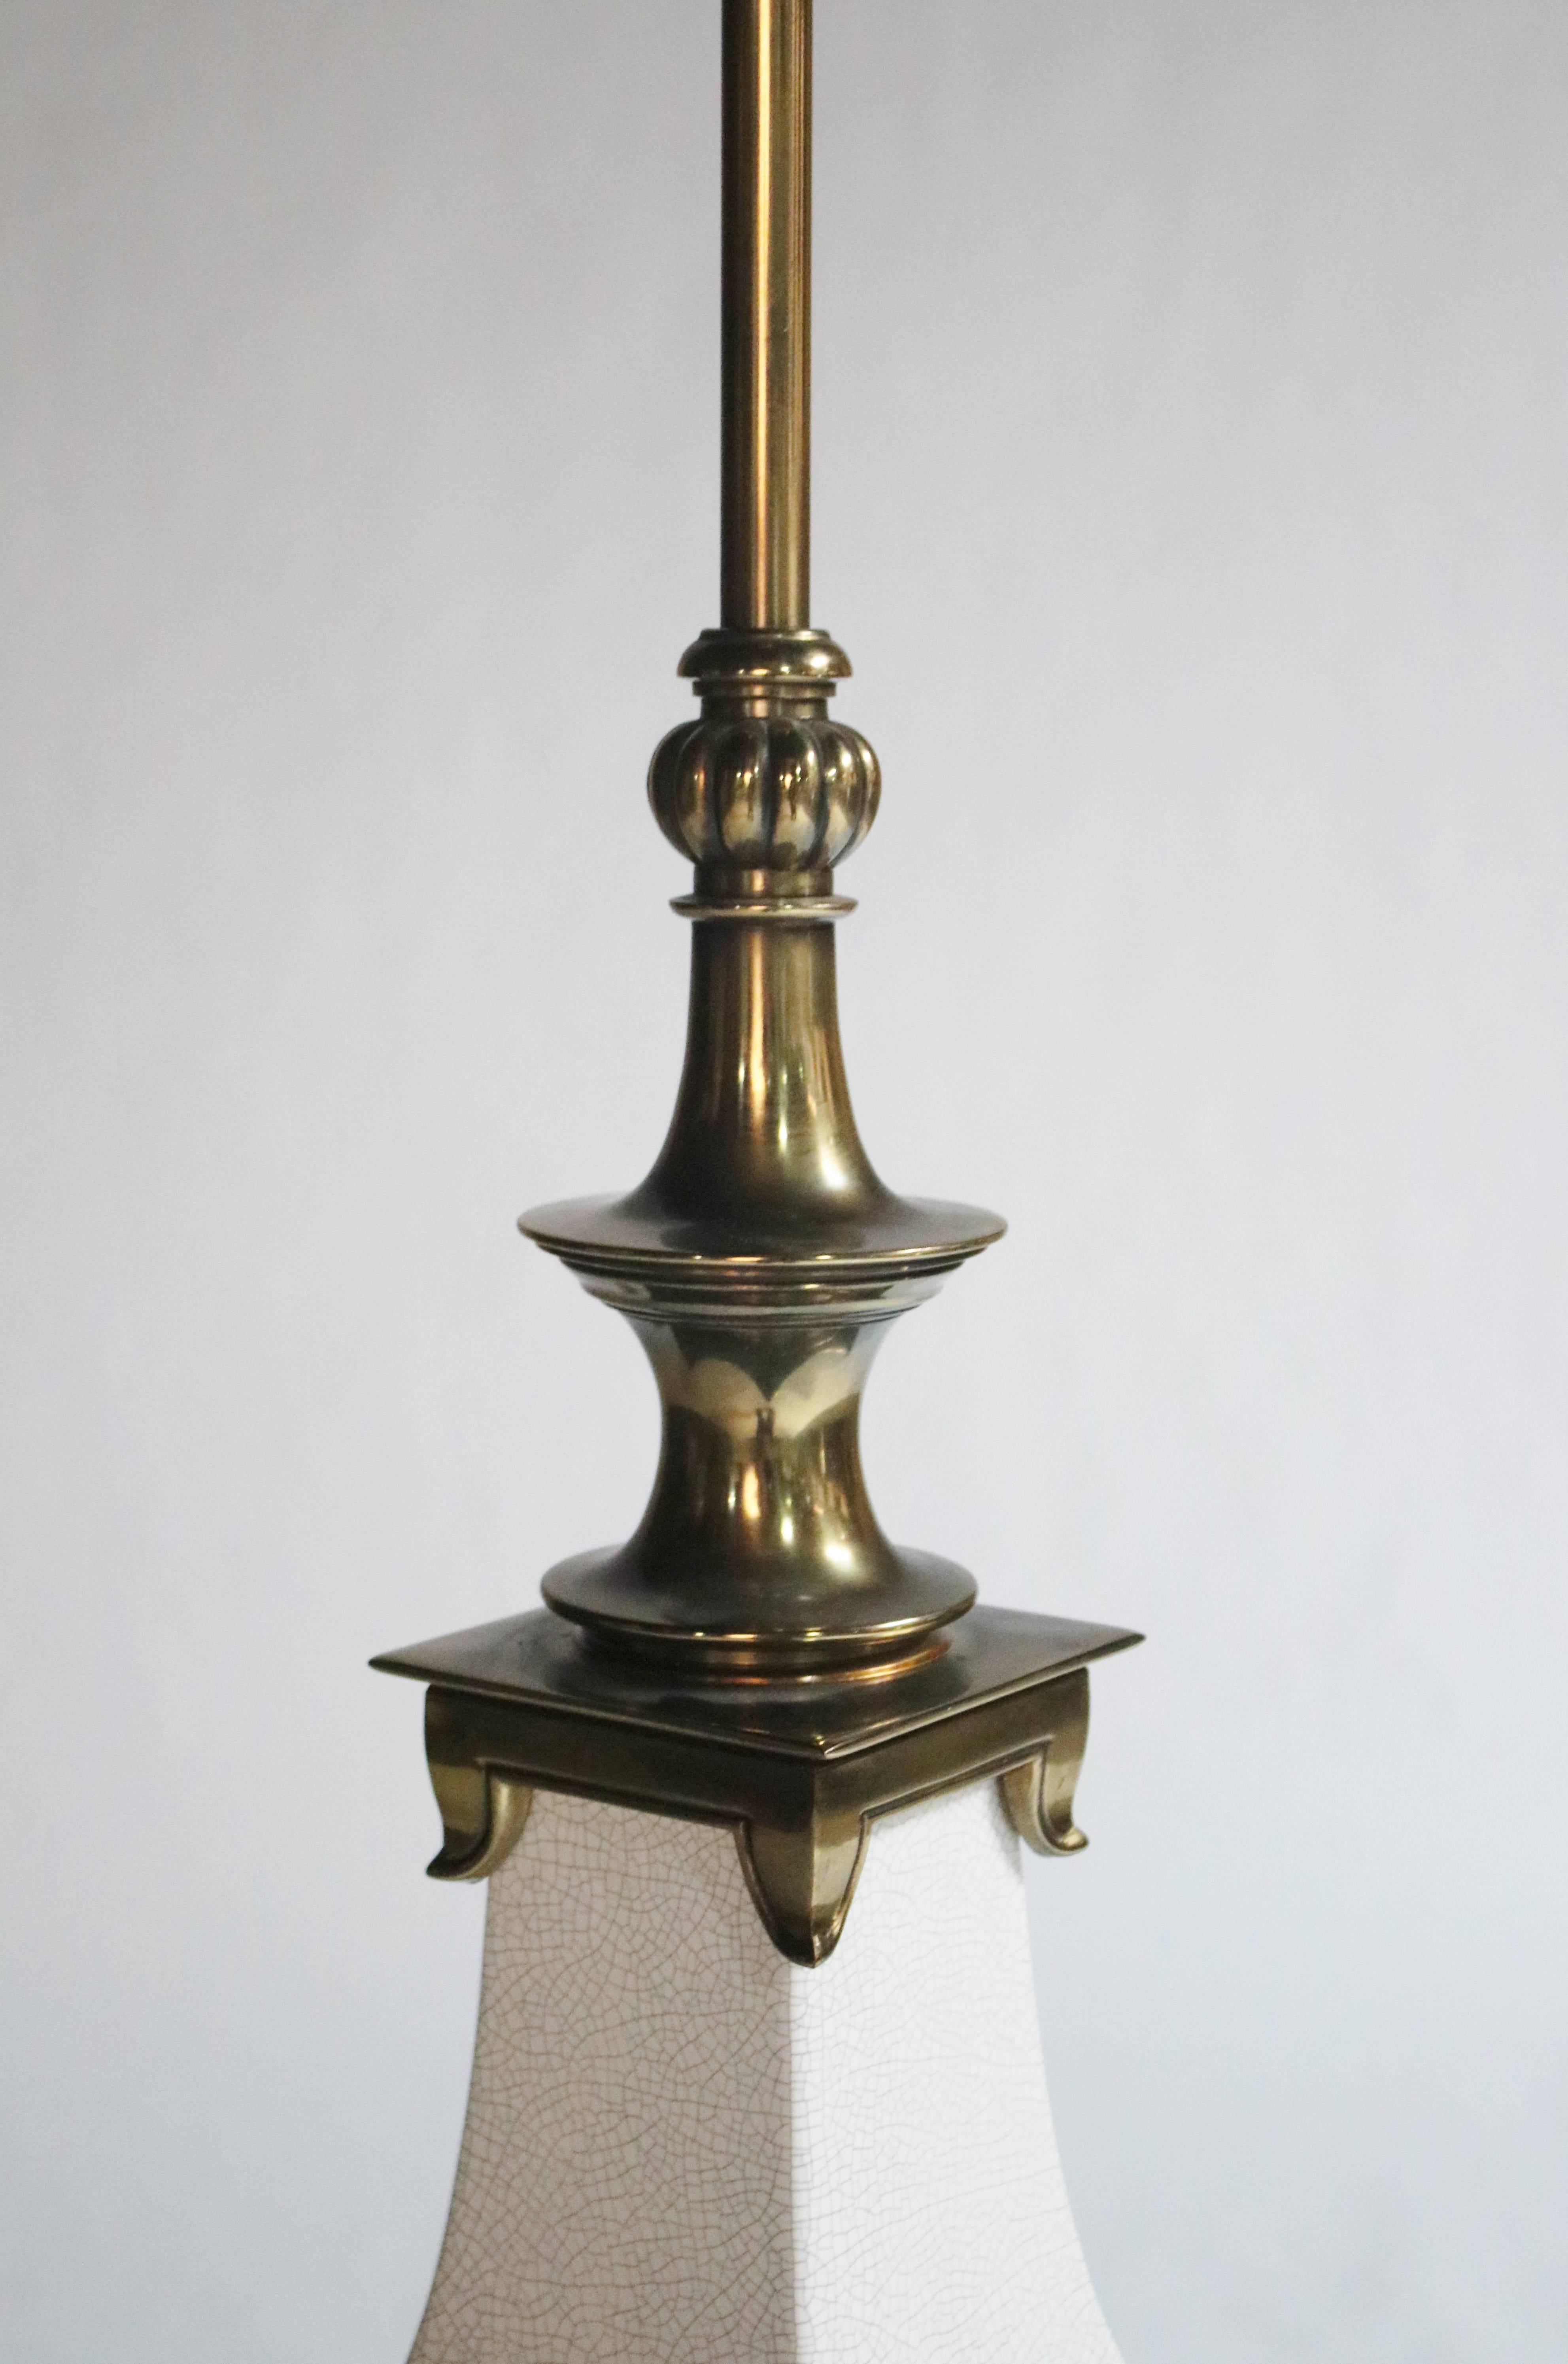 Asian style lamp made of white ceramic crackle glaze and brass details by Stiffel.